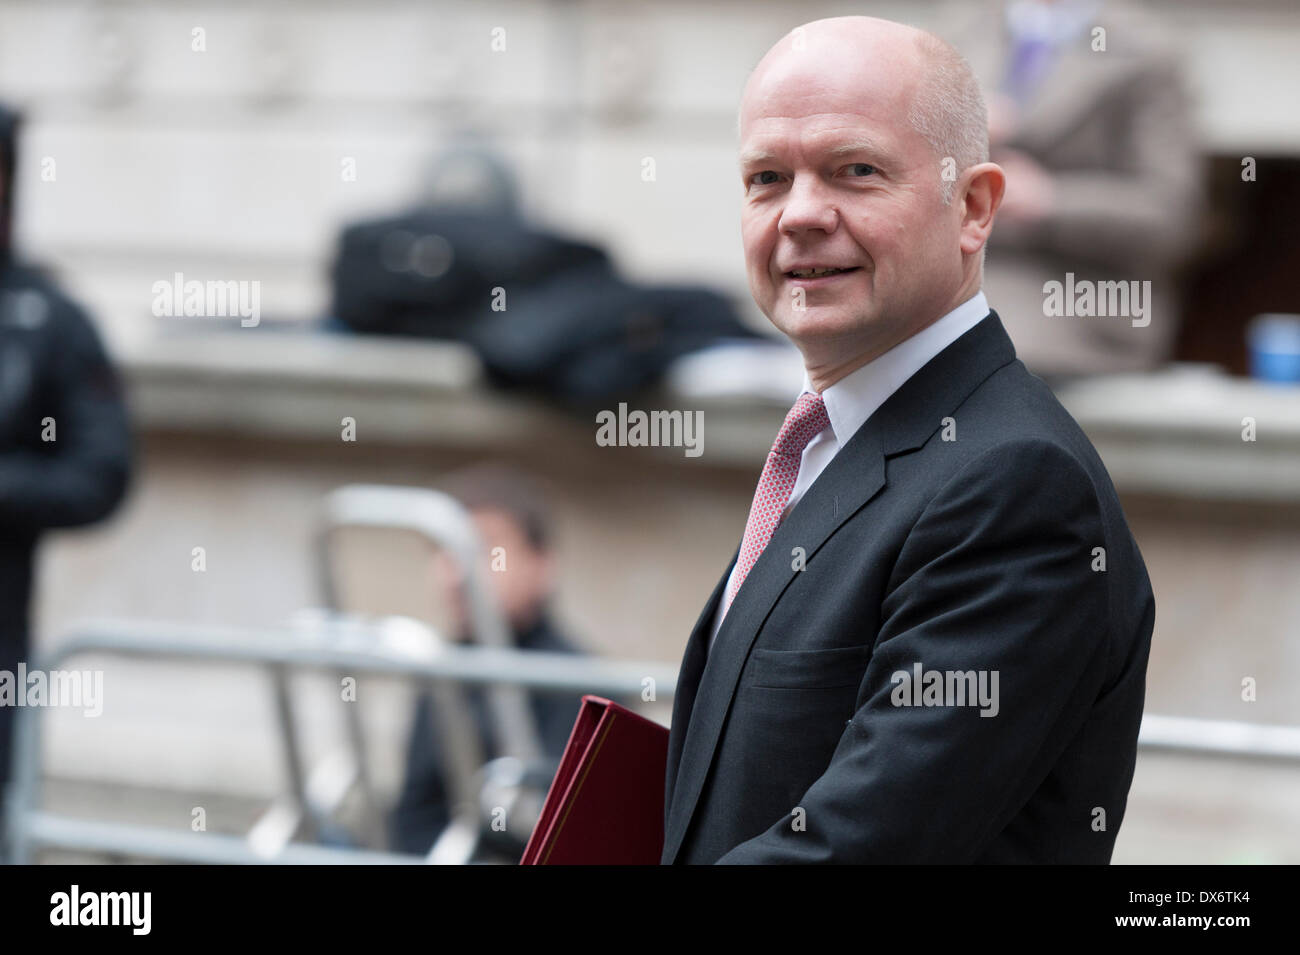 Downing Street, London, UK. 19th Mar, 2014. Downing Street was a hive of activity on Budget Day as the government prepared to disclose its budget for 2014. Pictured: WILLIAM HAGUE MP - First Secretary of State, Secretary of State for Foreign and Commonwealth Affairs. Credit:  Lee Thomas/Alamy Live News Stock Photo